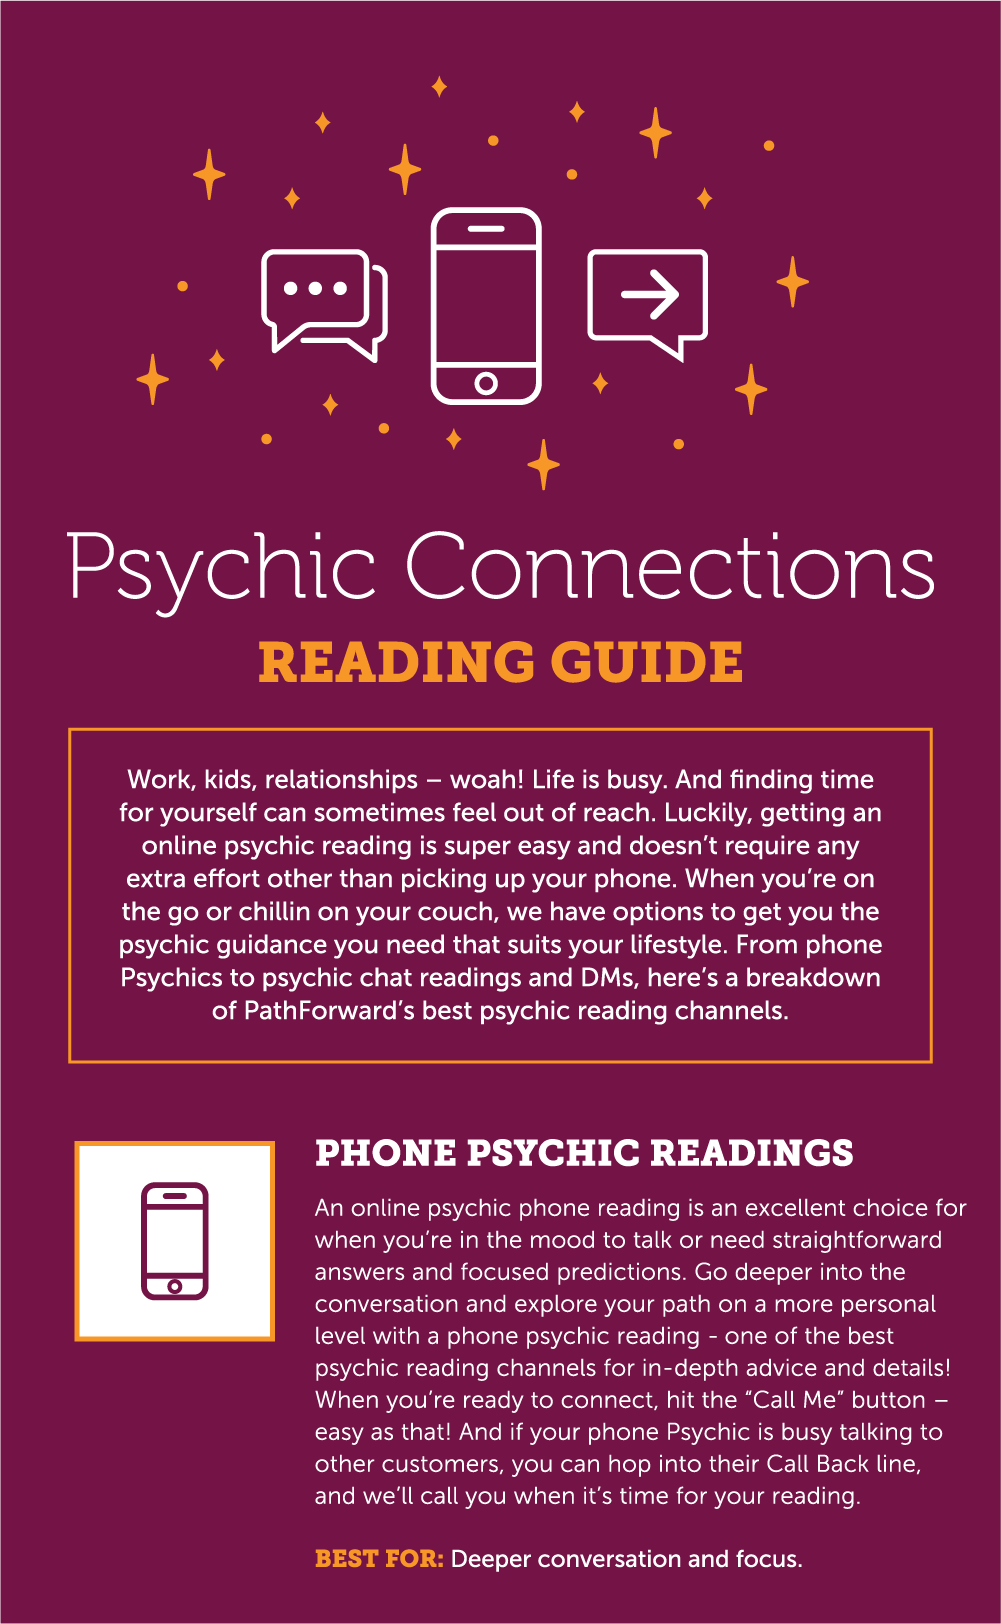 Deciding which online psychic service to turn to for insight is no small challenge! PathForward is happy to offer multiple reading options, from phone psychics to psychic cha, to fit any lifestyle or need!